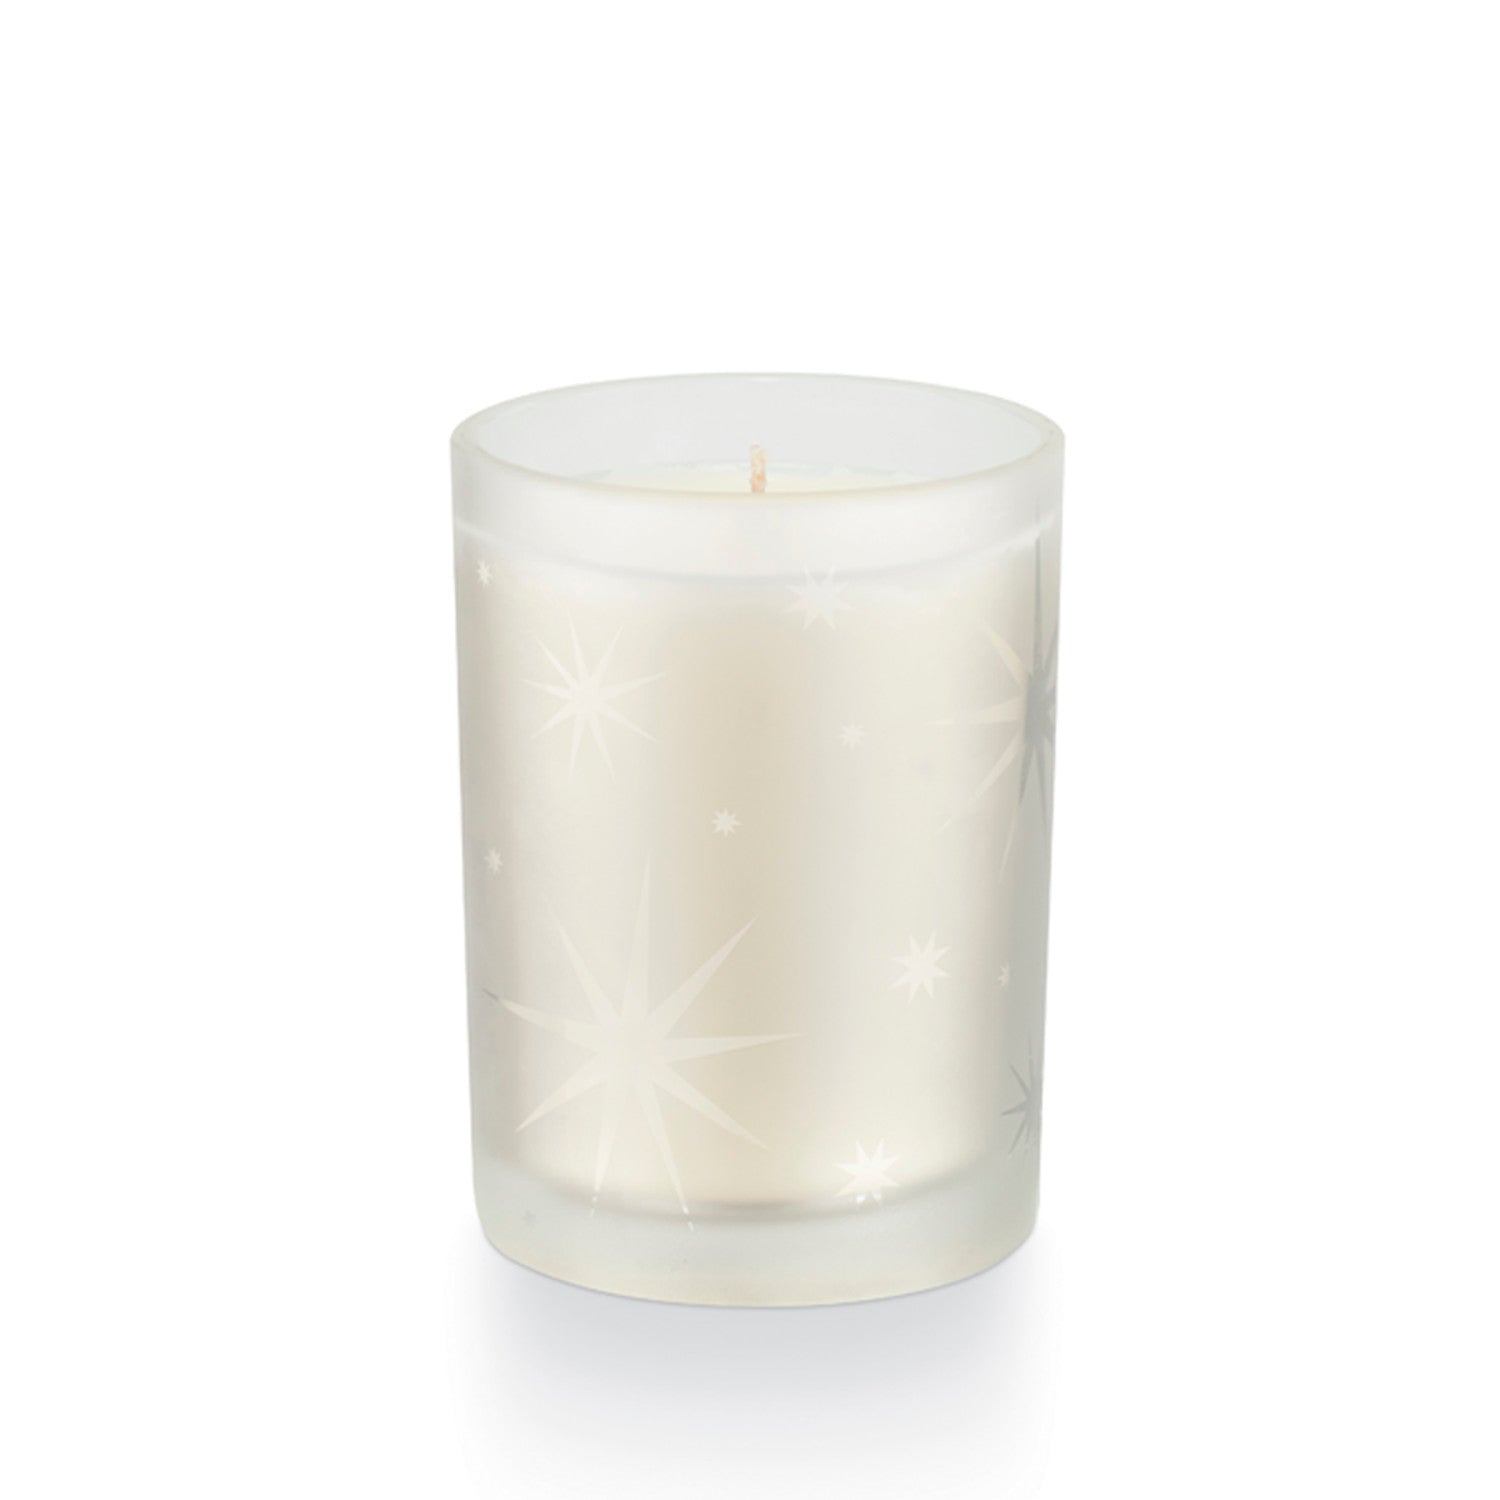 The Wondermint Gifted Glass Candle